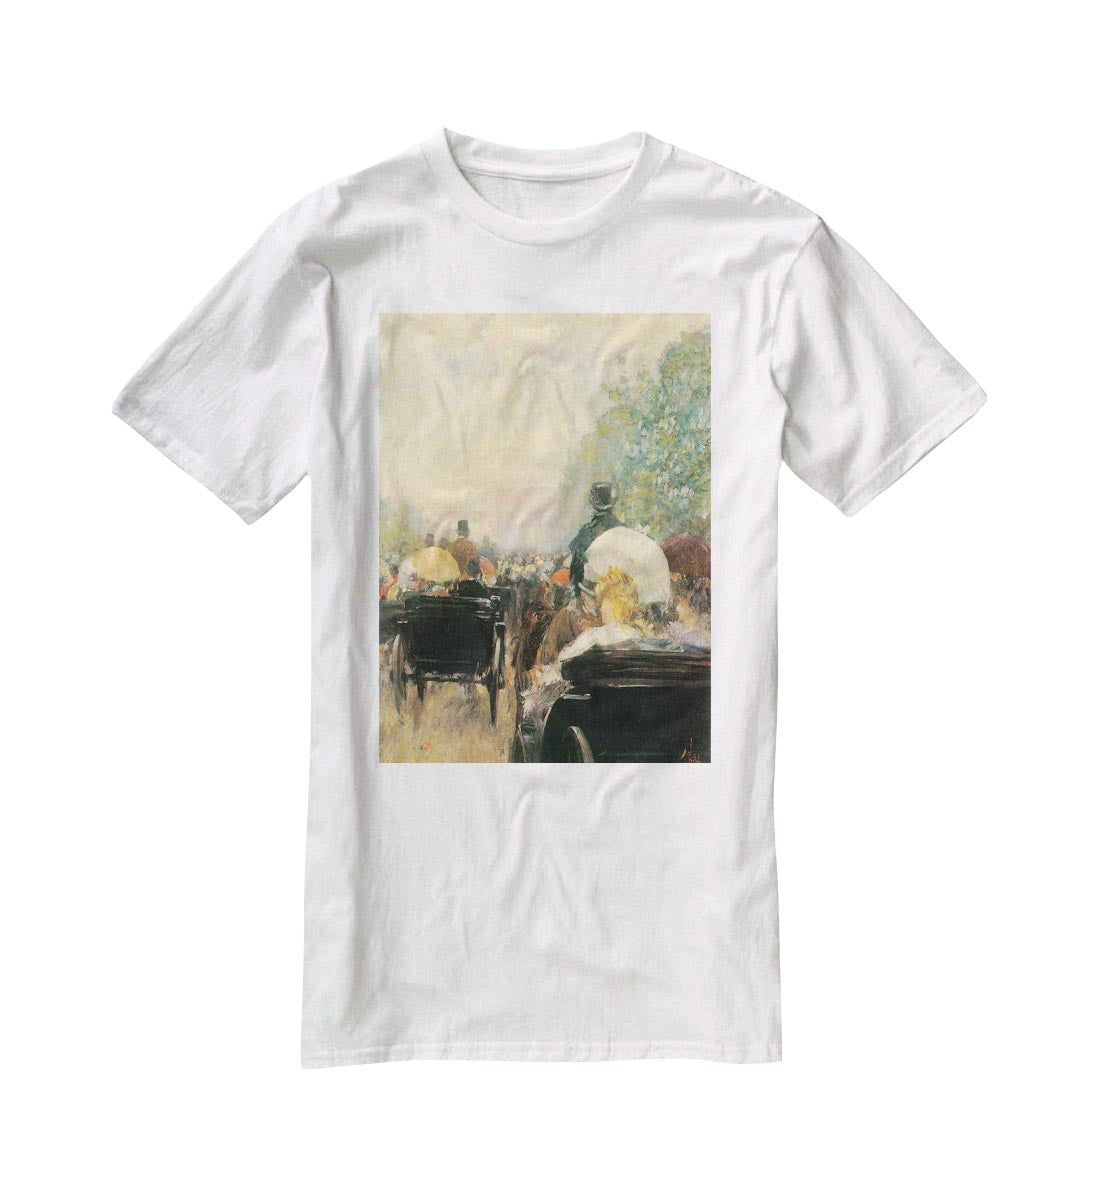 Carriage Parade by Hassam T-Shirt - Canvas Art Rocks - 5